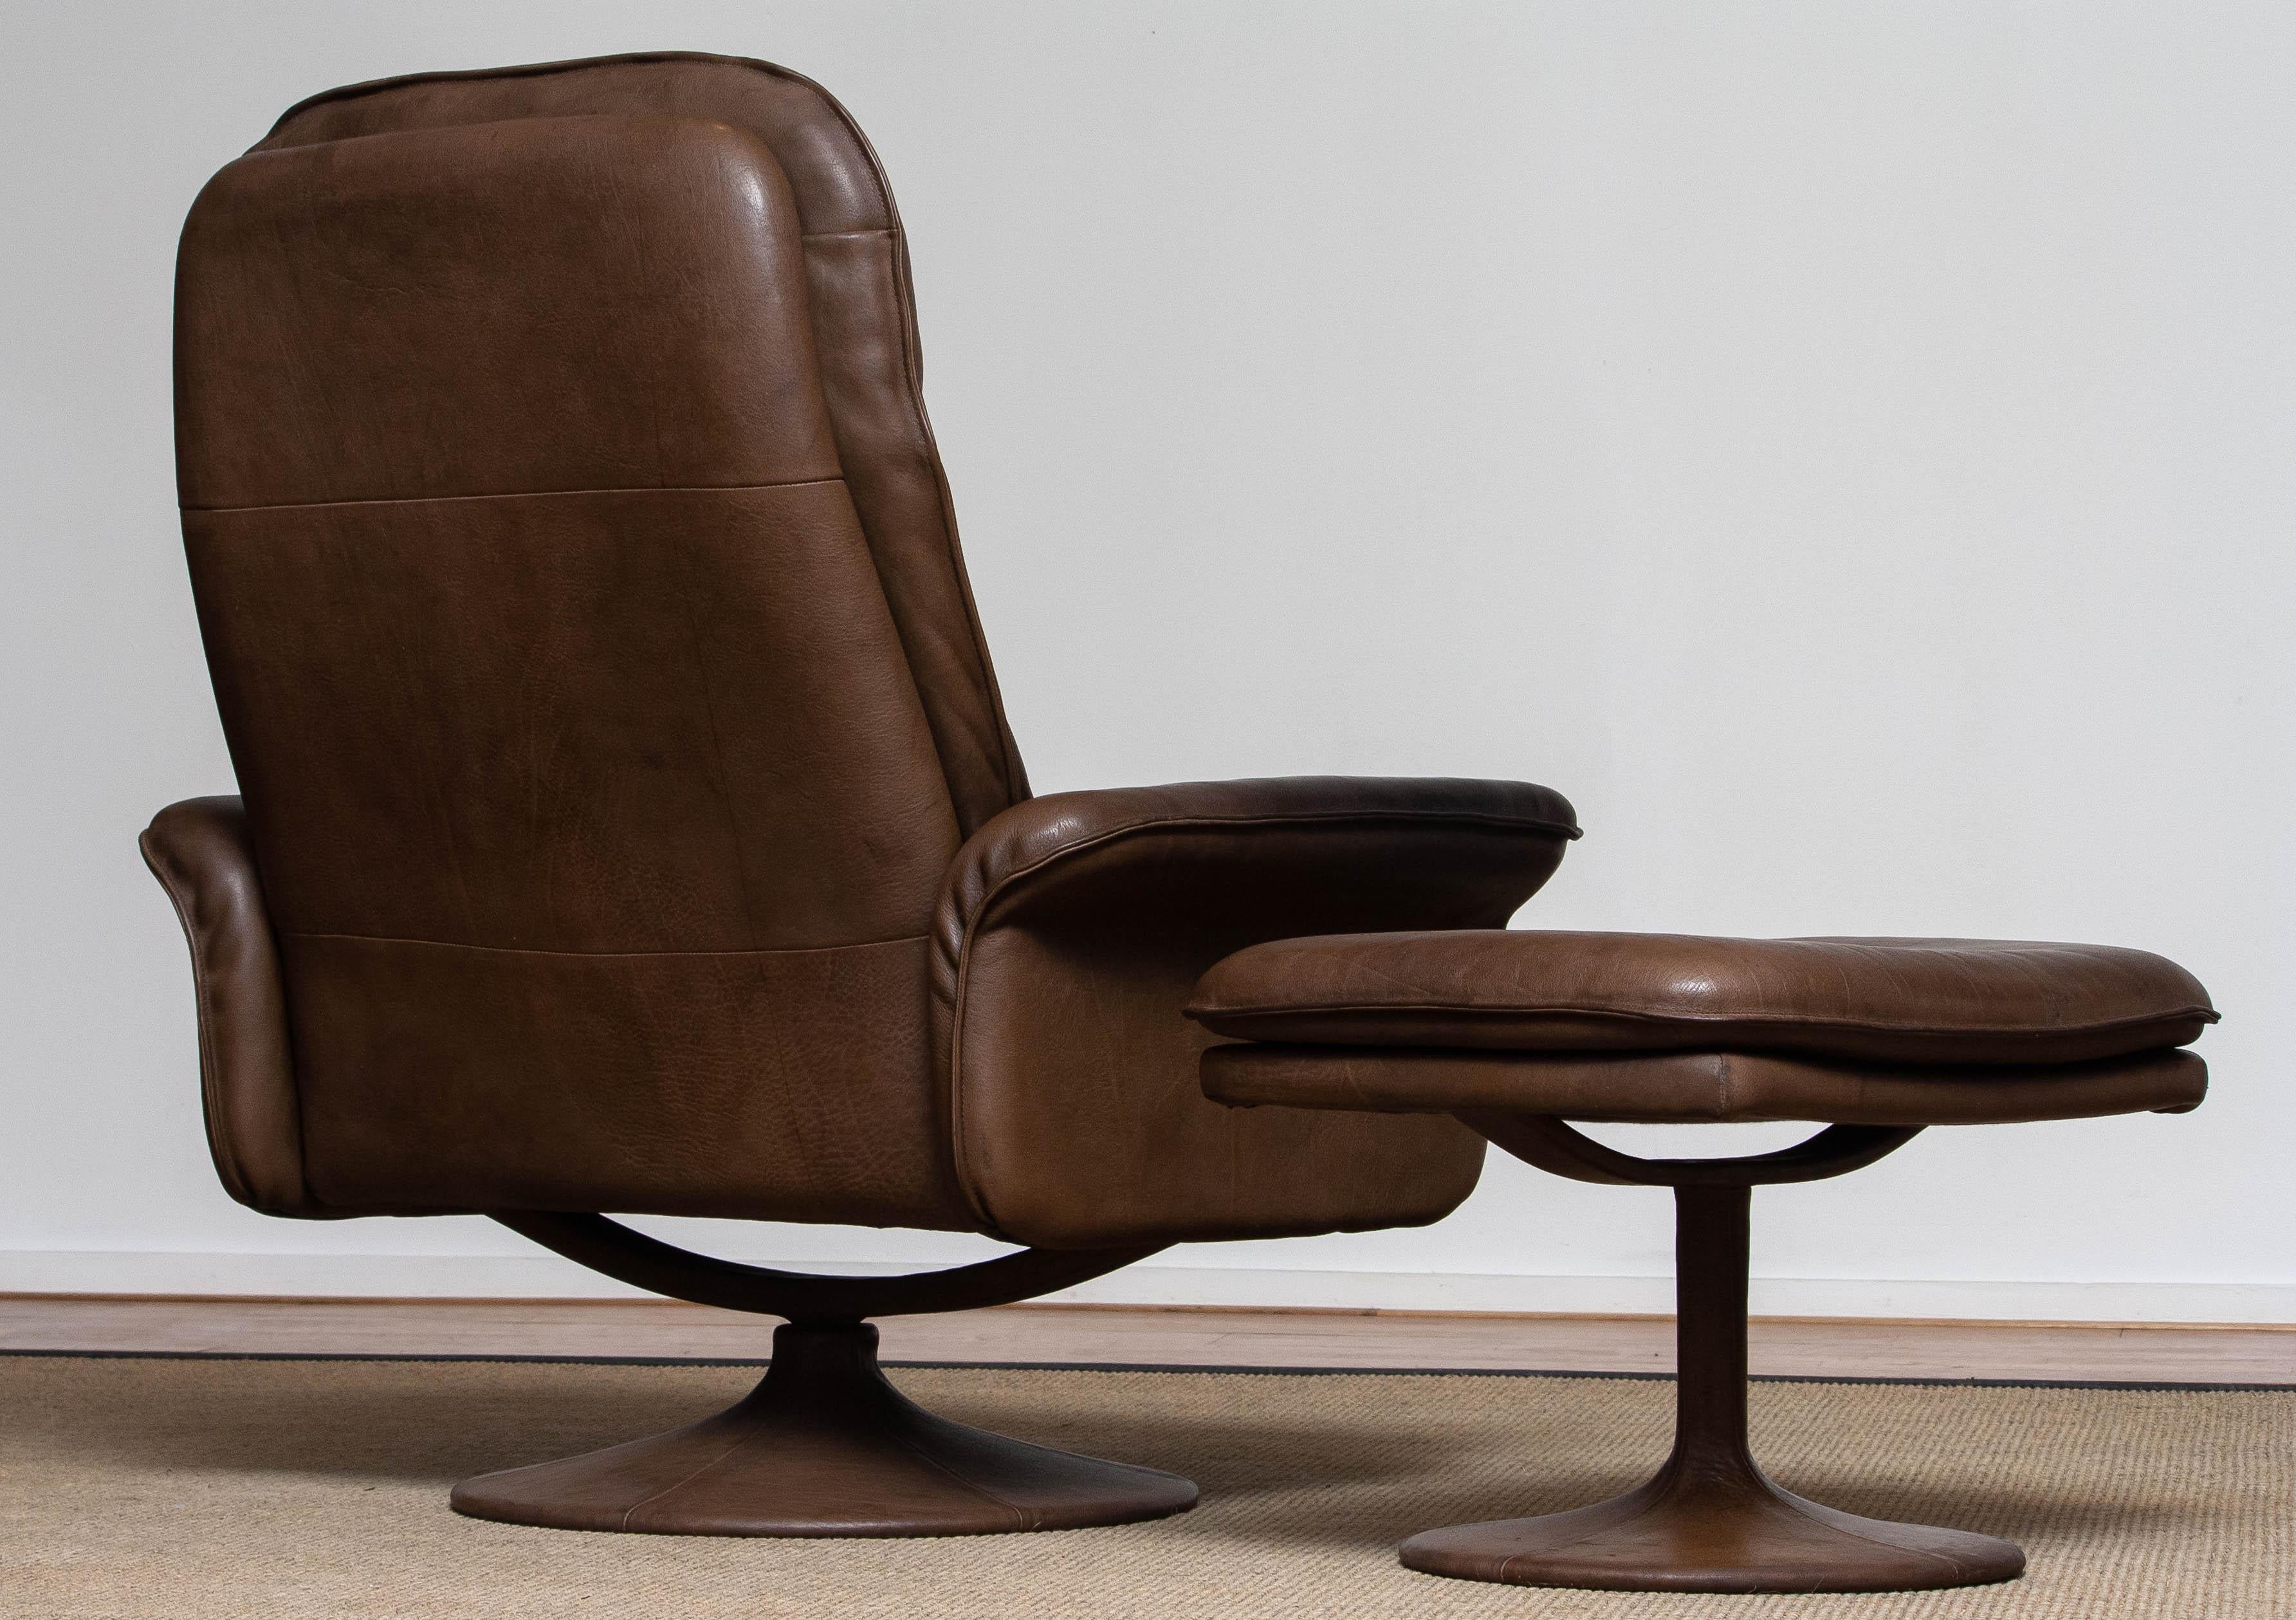 1970's Buffalo Leather Swivel and Relax Chair with Matching Ottoman by De Sede 2